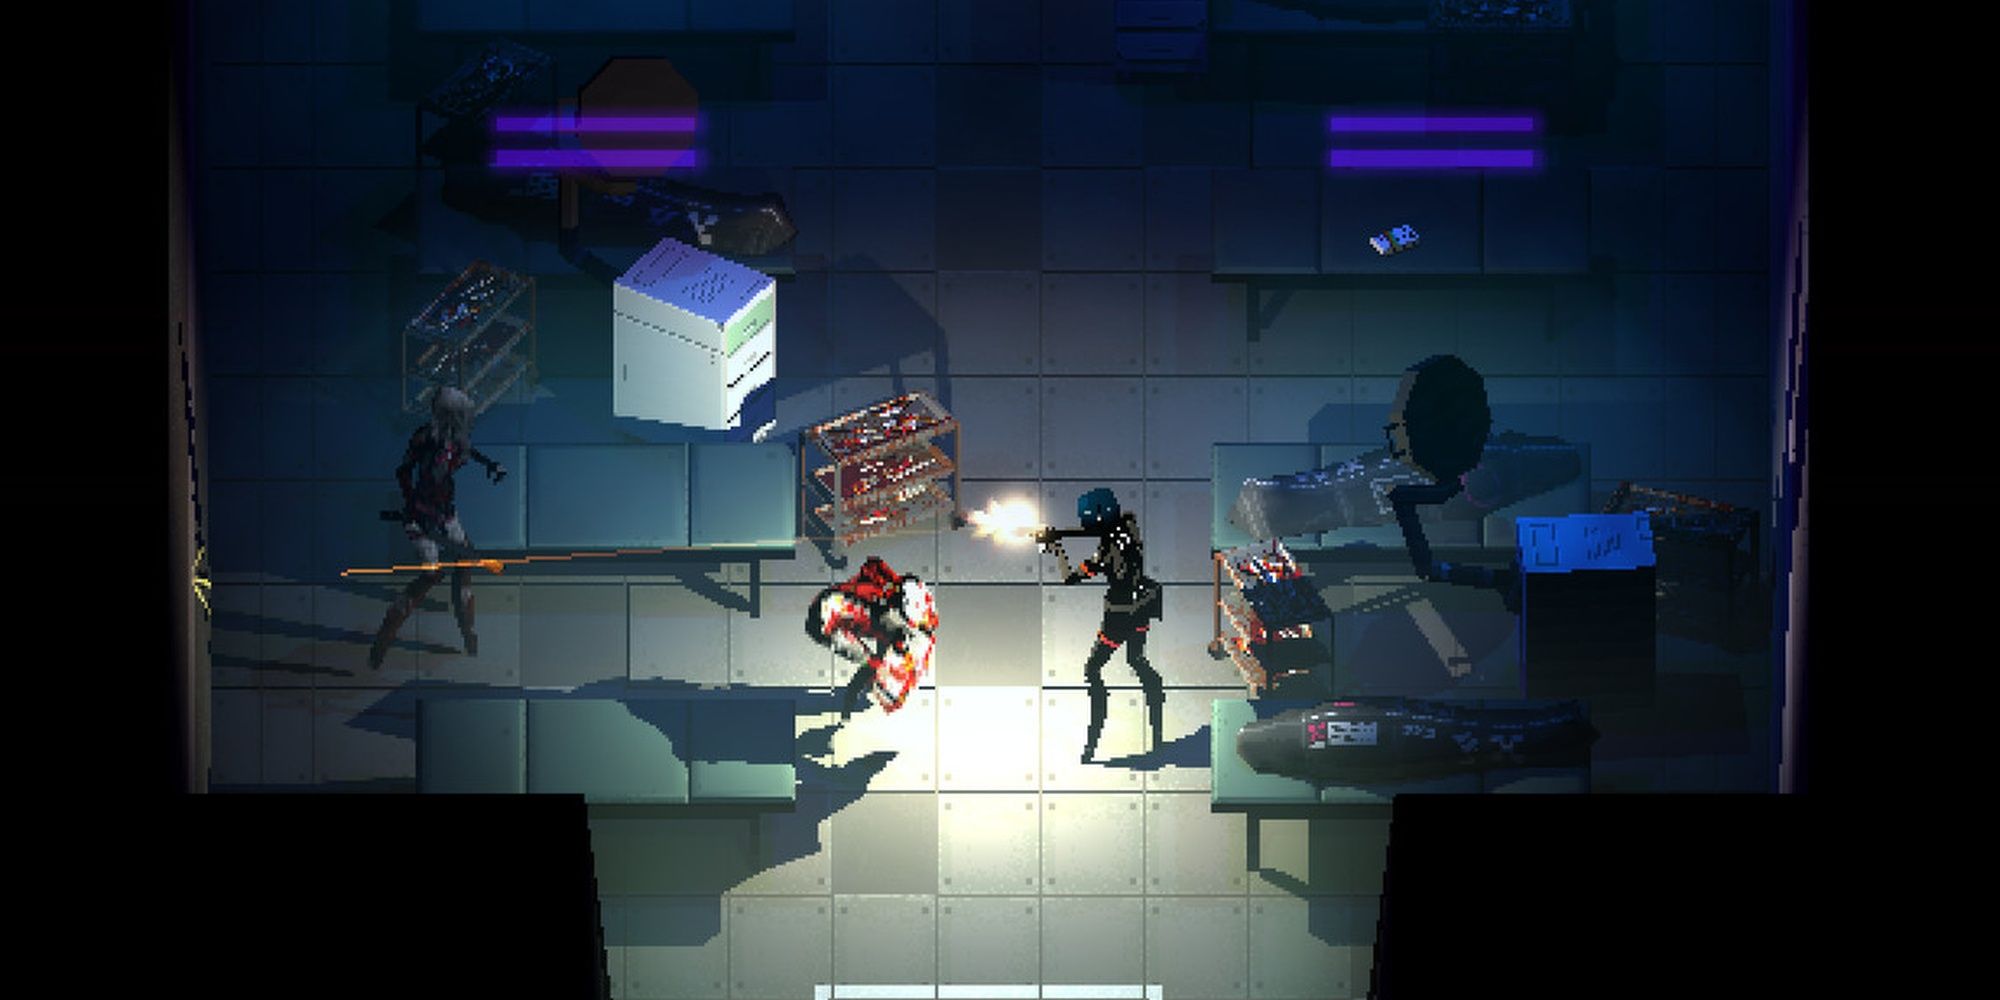 Signalis: Elster Fighting Cybernetic Mutants In A Laboratory